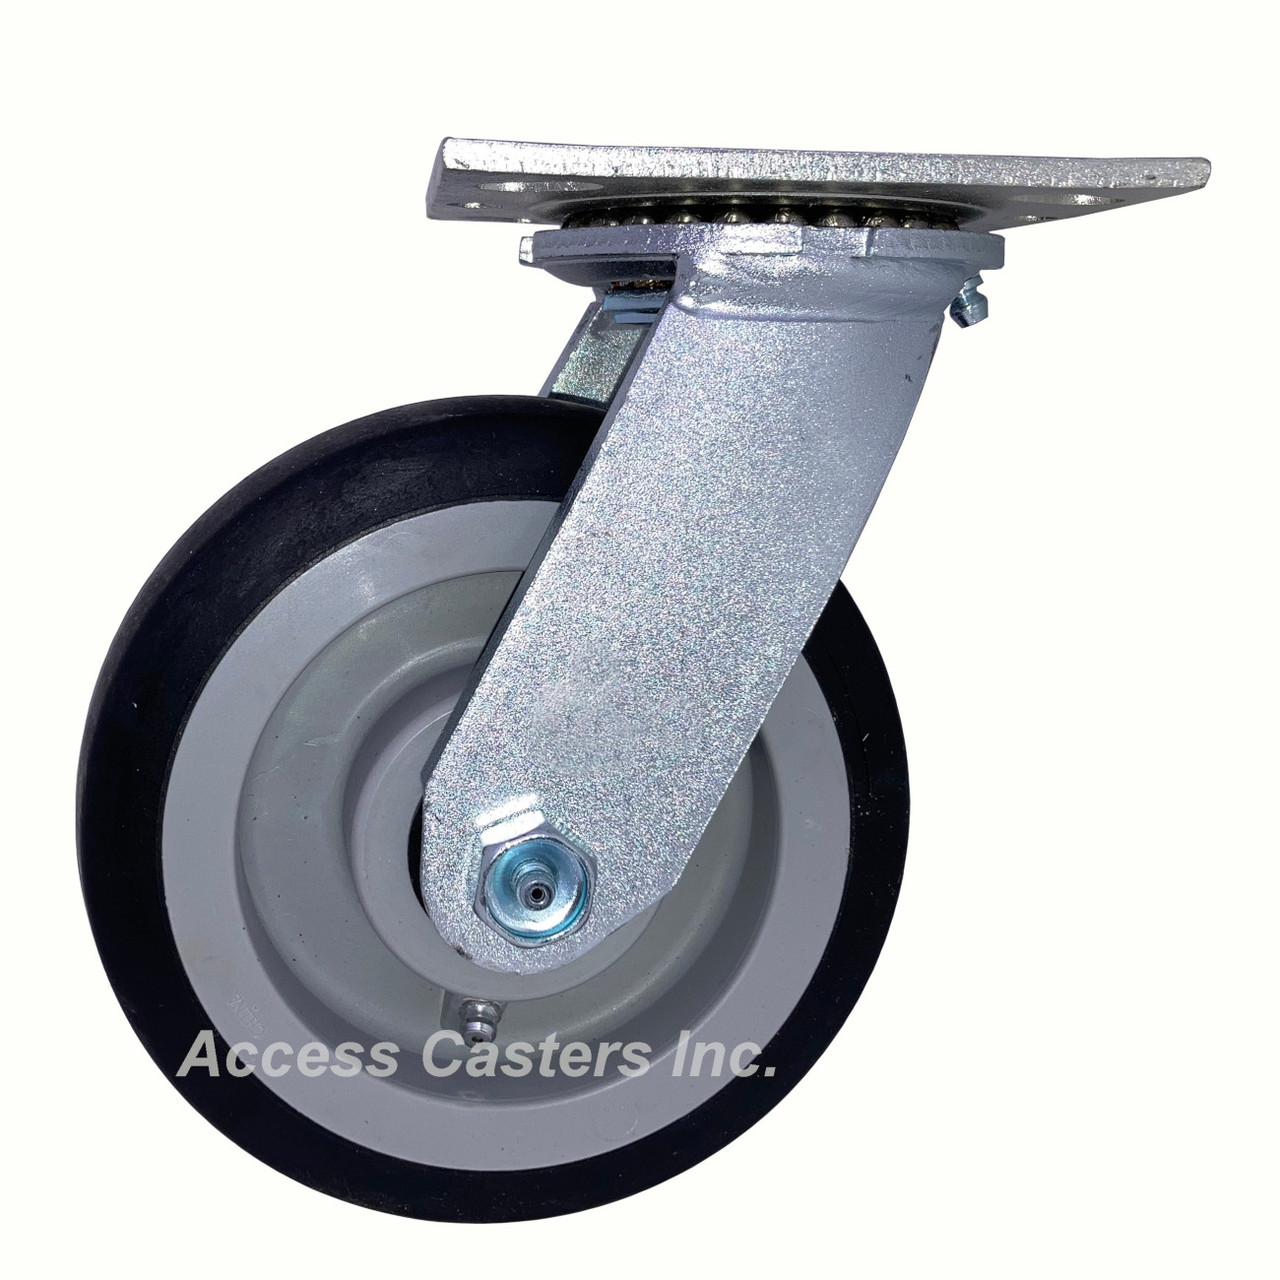 6" Swivel caster with black TPR wheel